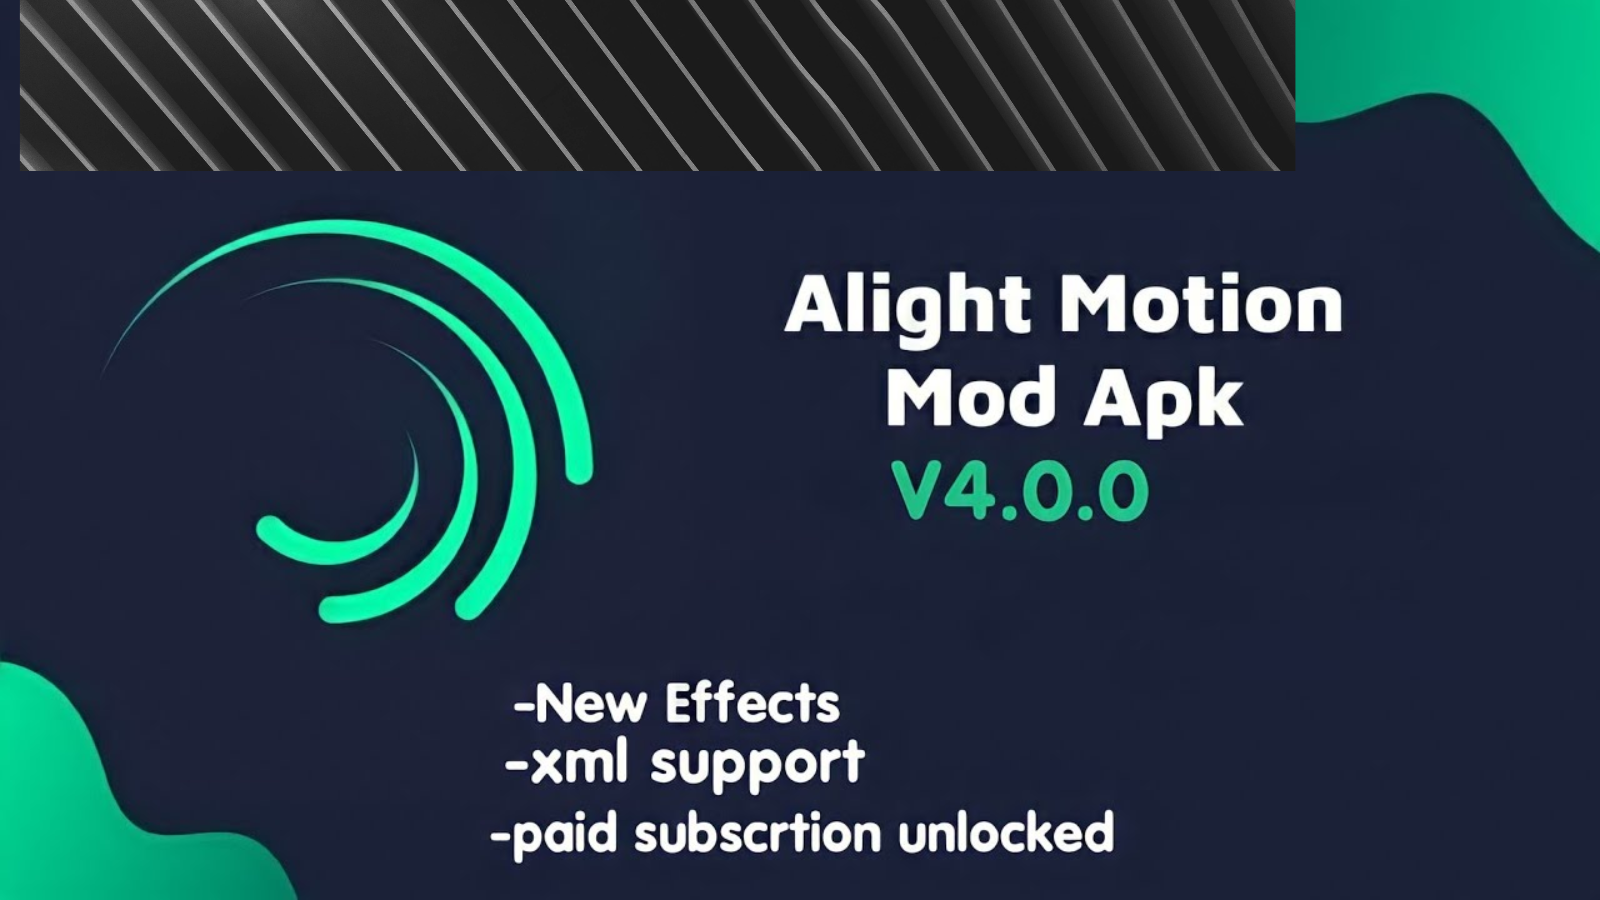 Download the Alight Motion Mod APK Latest & Old Version